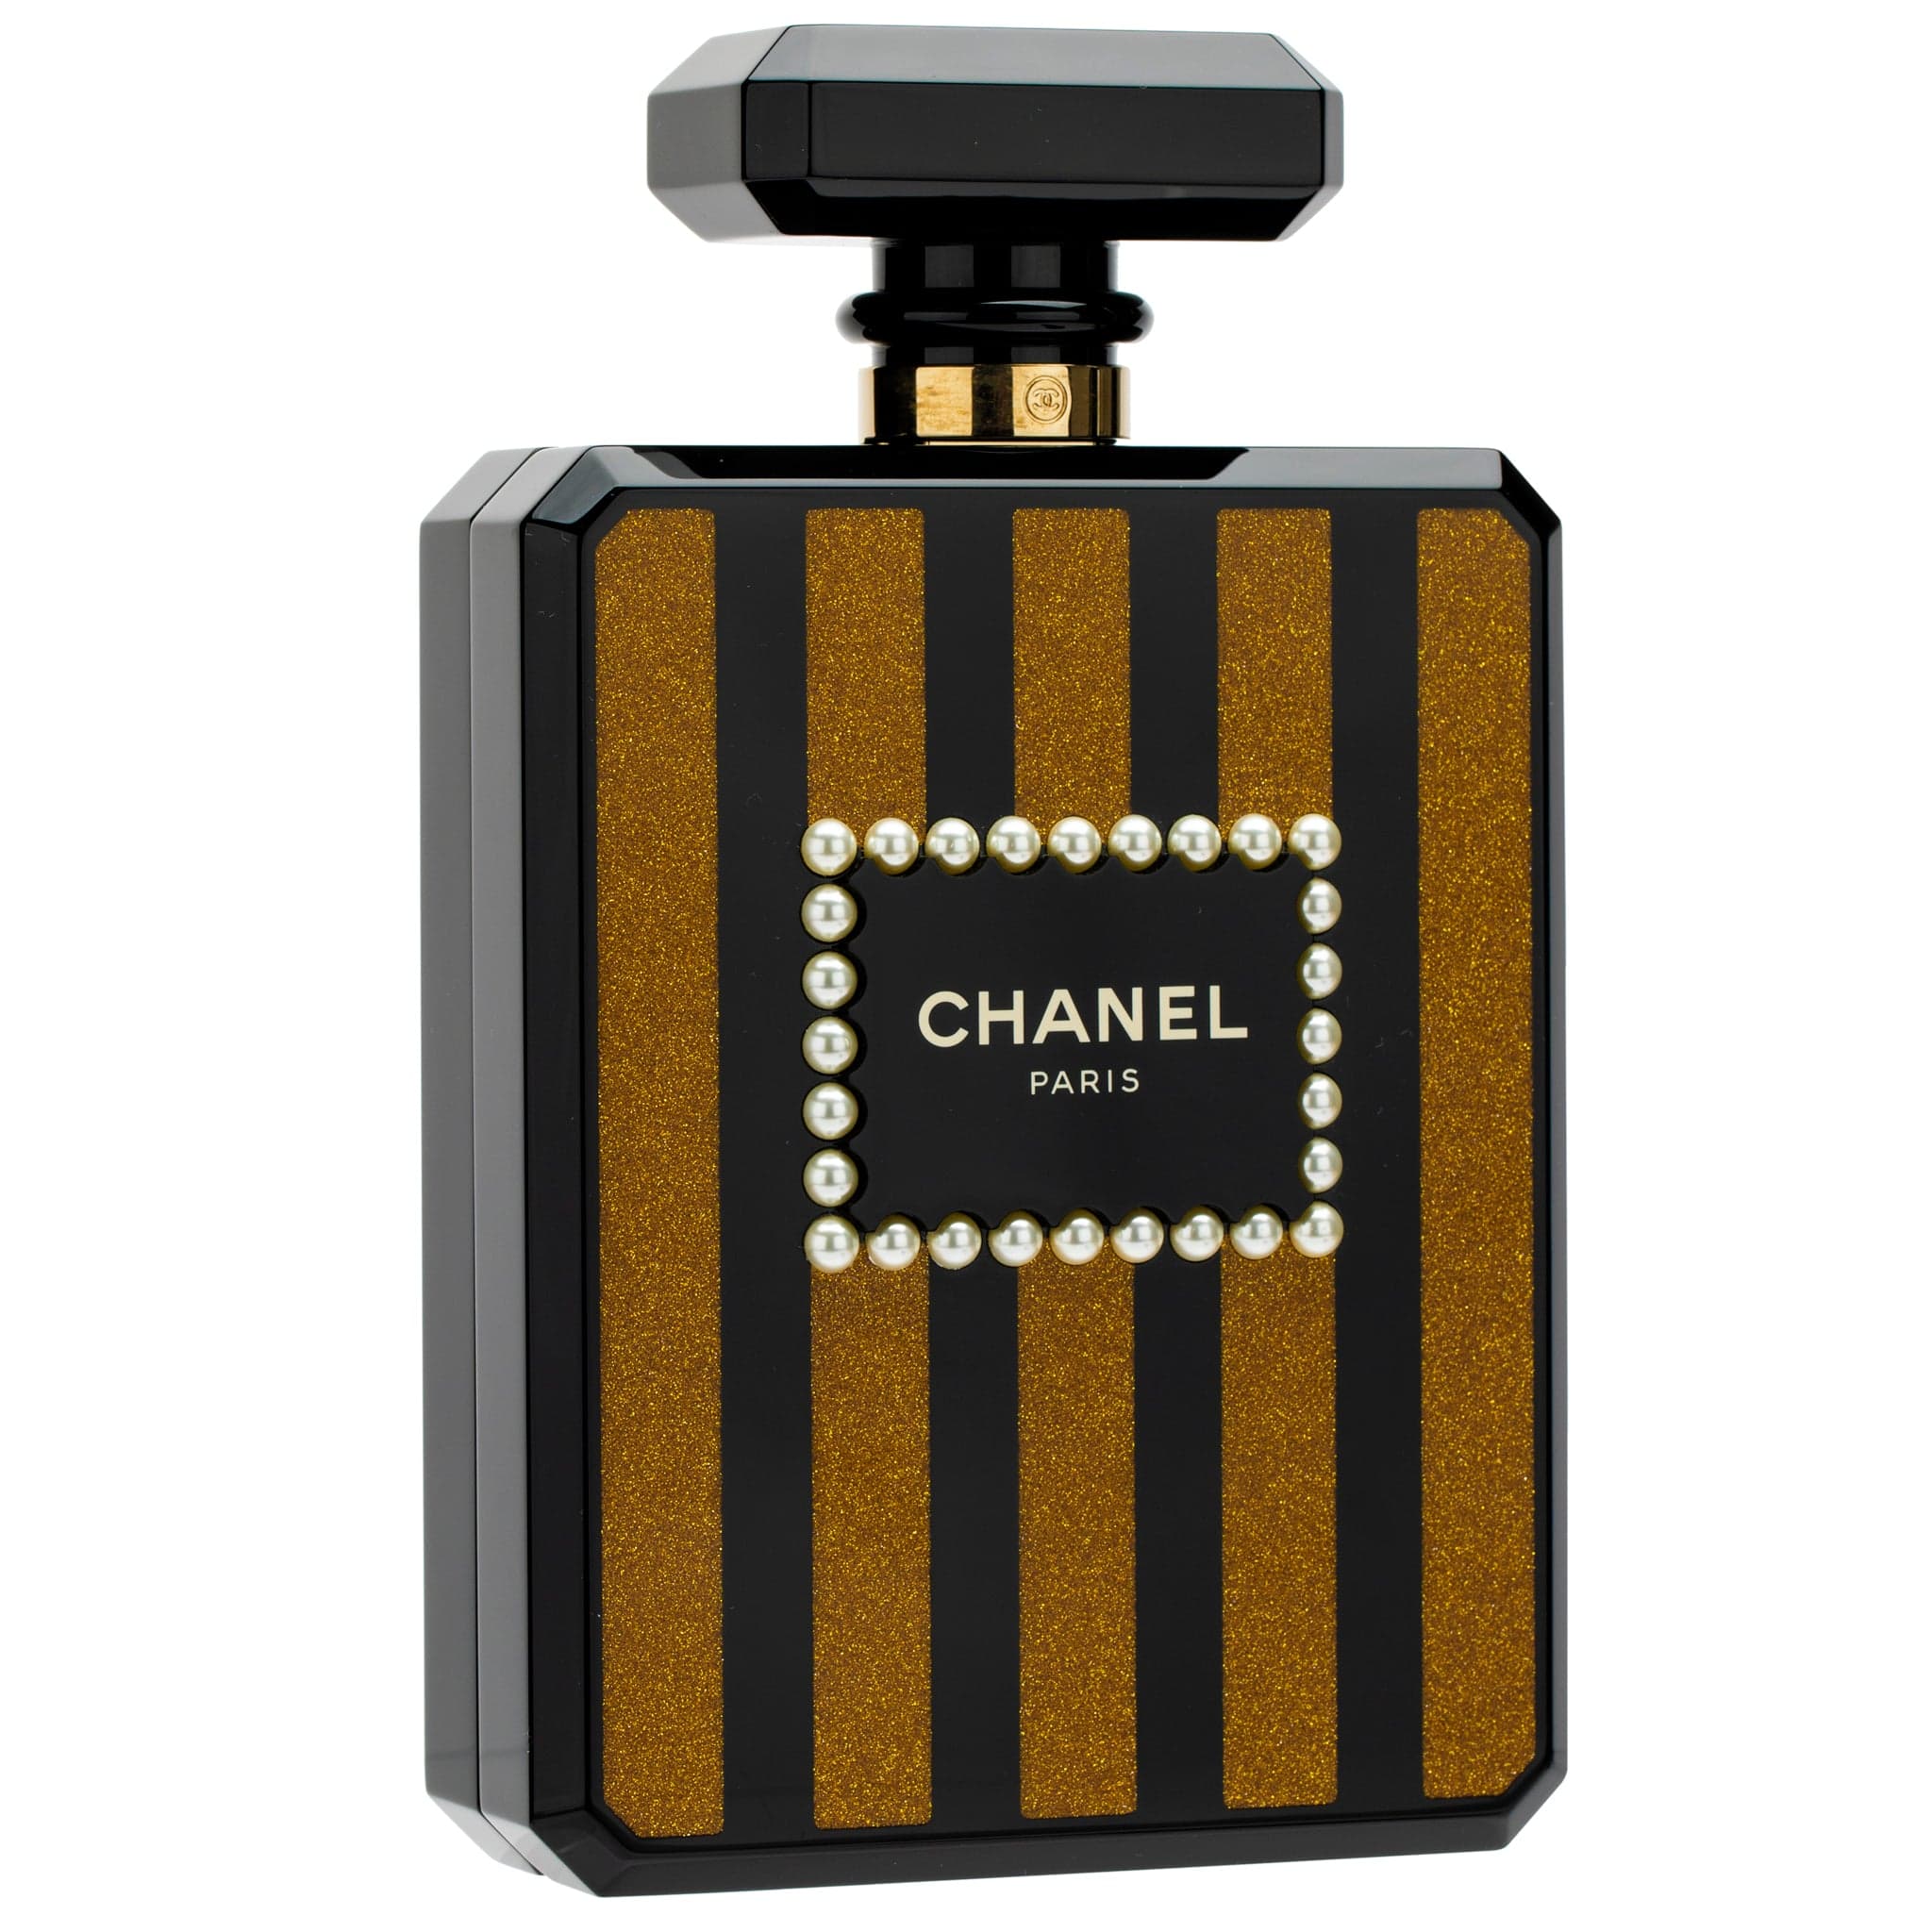 CHANEL MINAUDIÈRE LIMITED EDITION LUCITE PERFUME BOTTLE BLACK, GOLD GLITTER & PEARLS GOLD HARDWARE - On Repeat